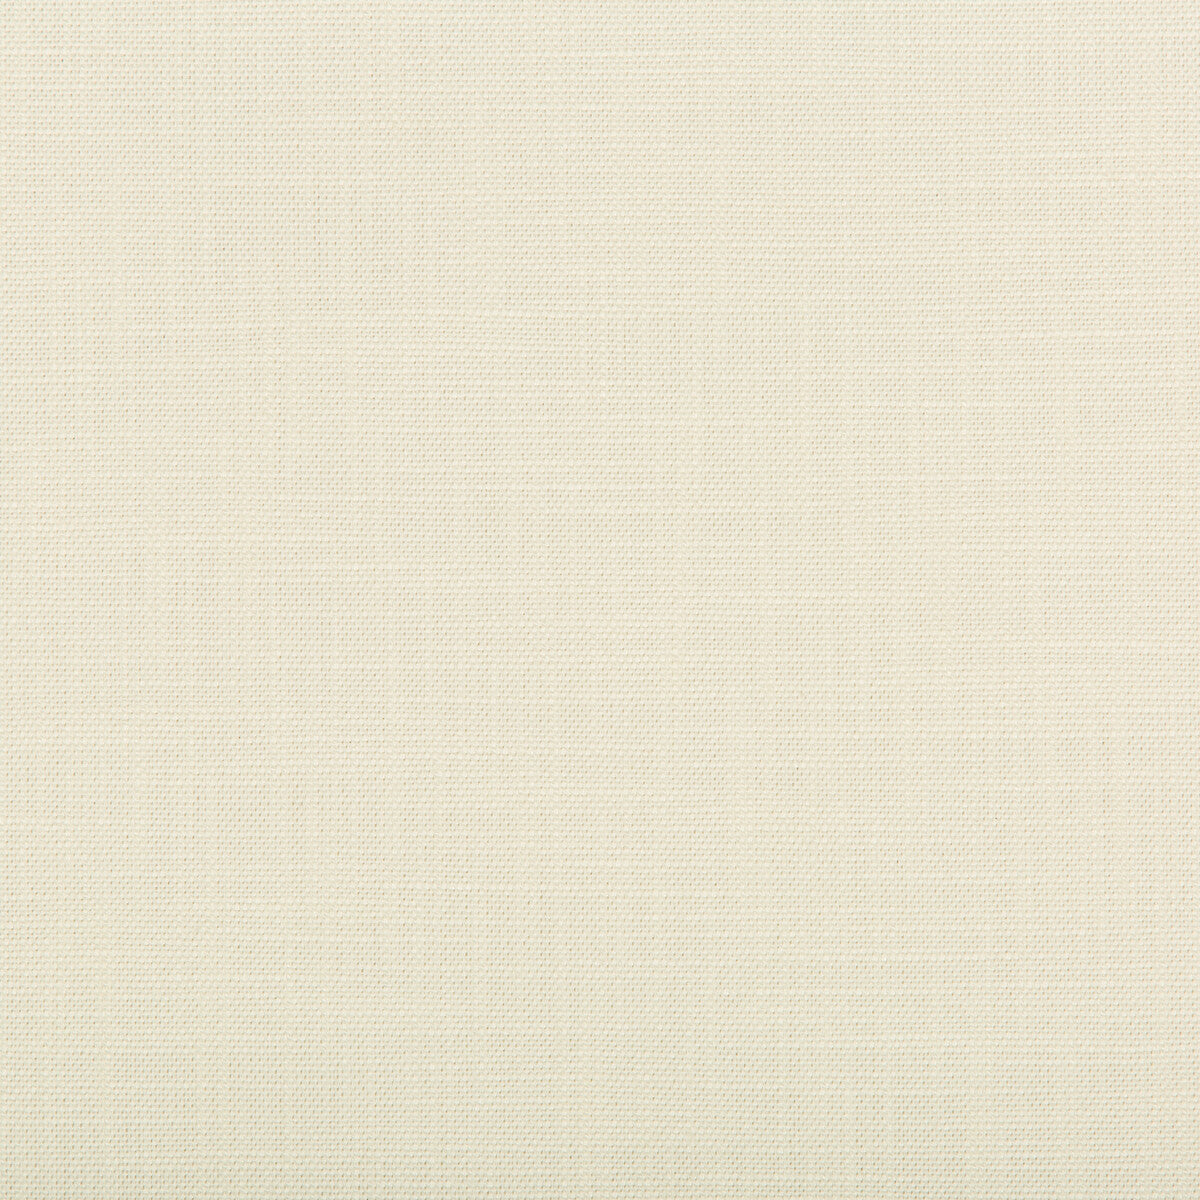 Kravet Contract fabric in 4648-1 color - pattern 4648.1.0 - by Kravet Contract